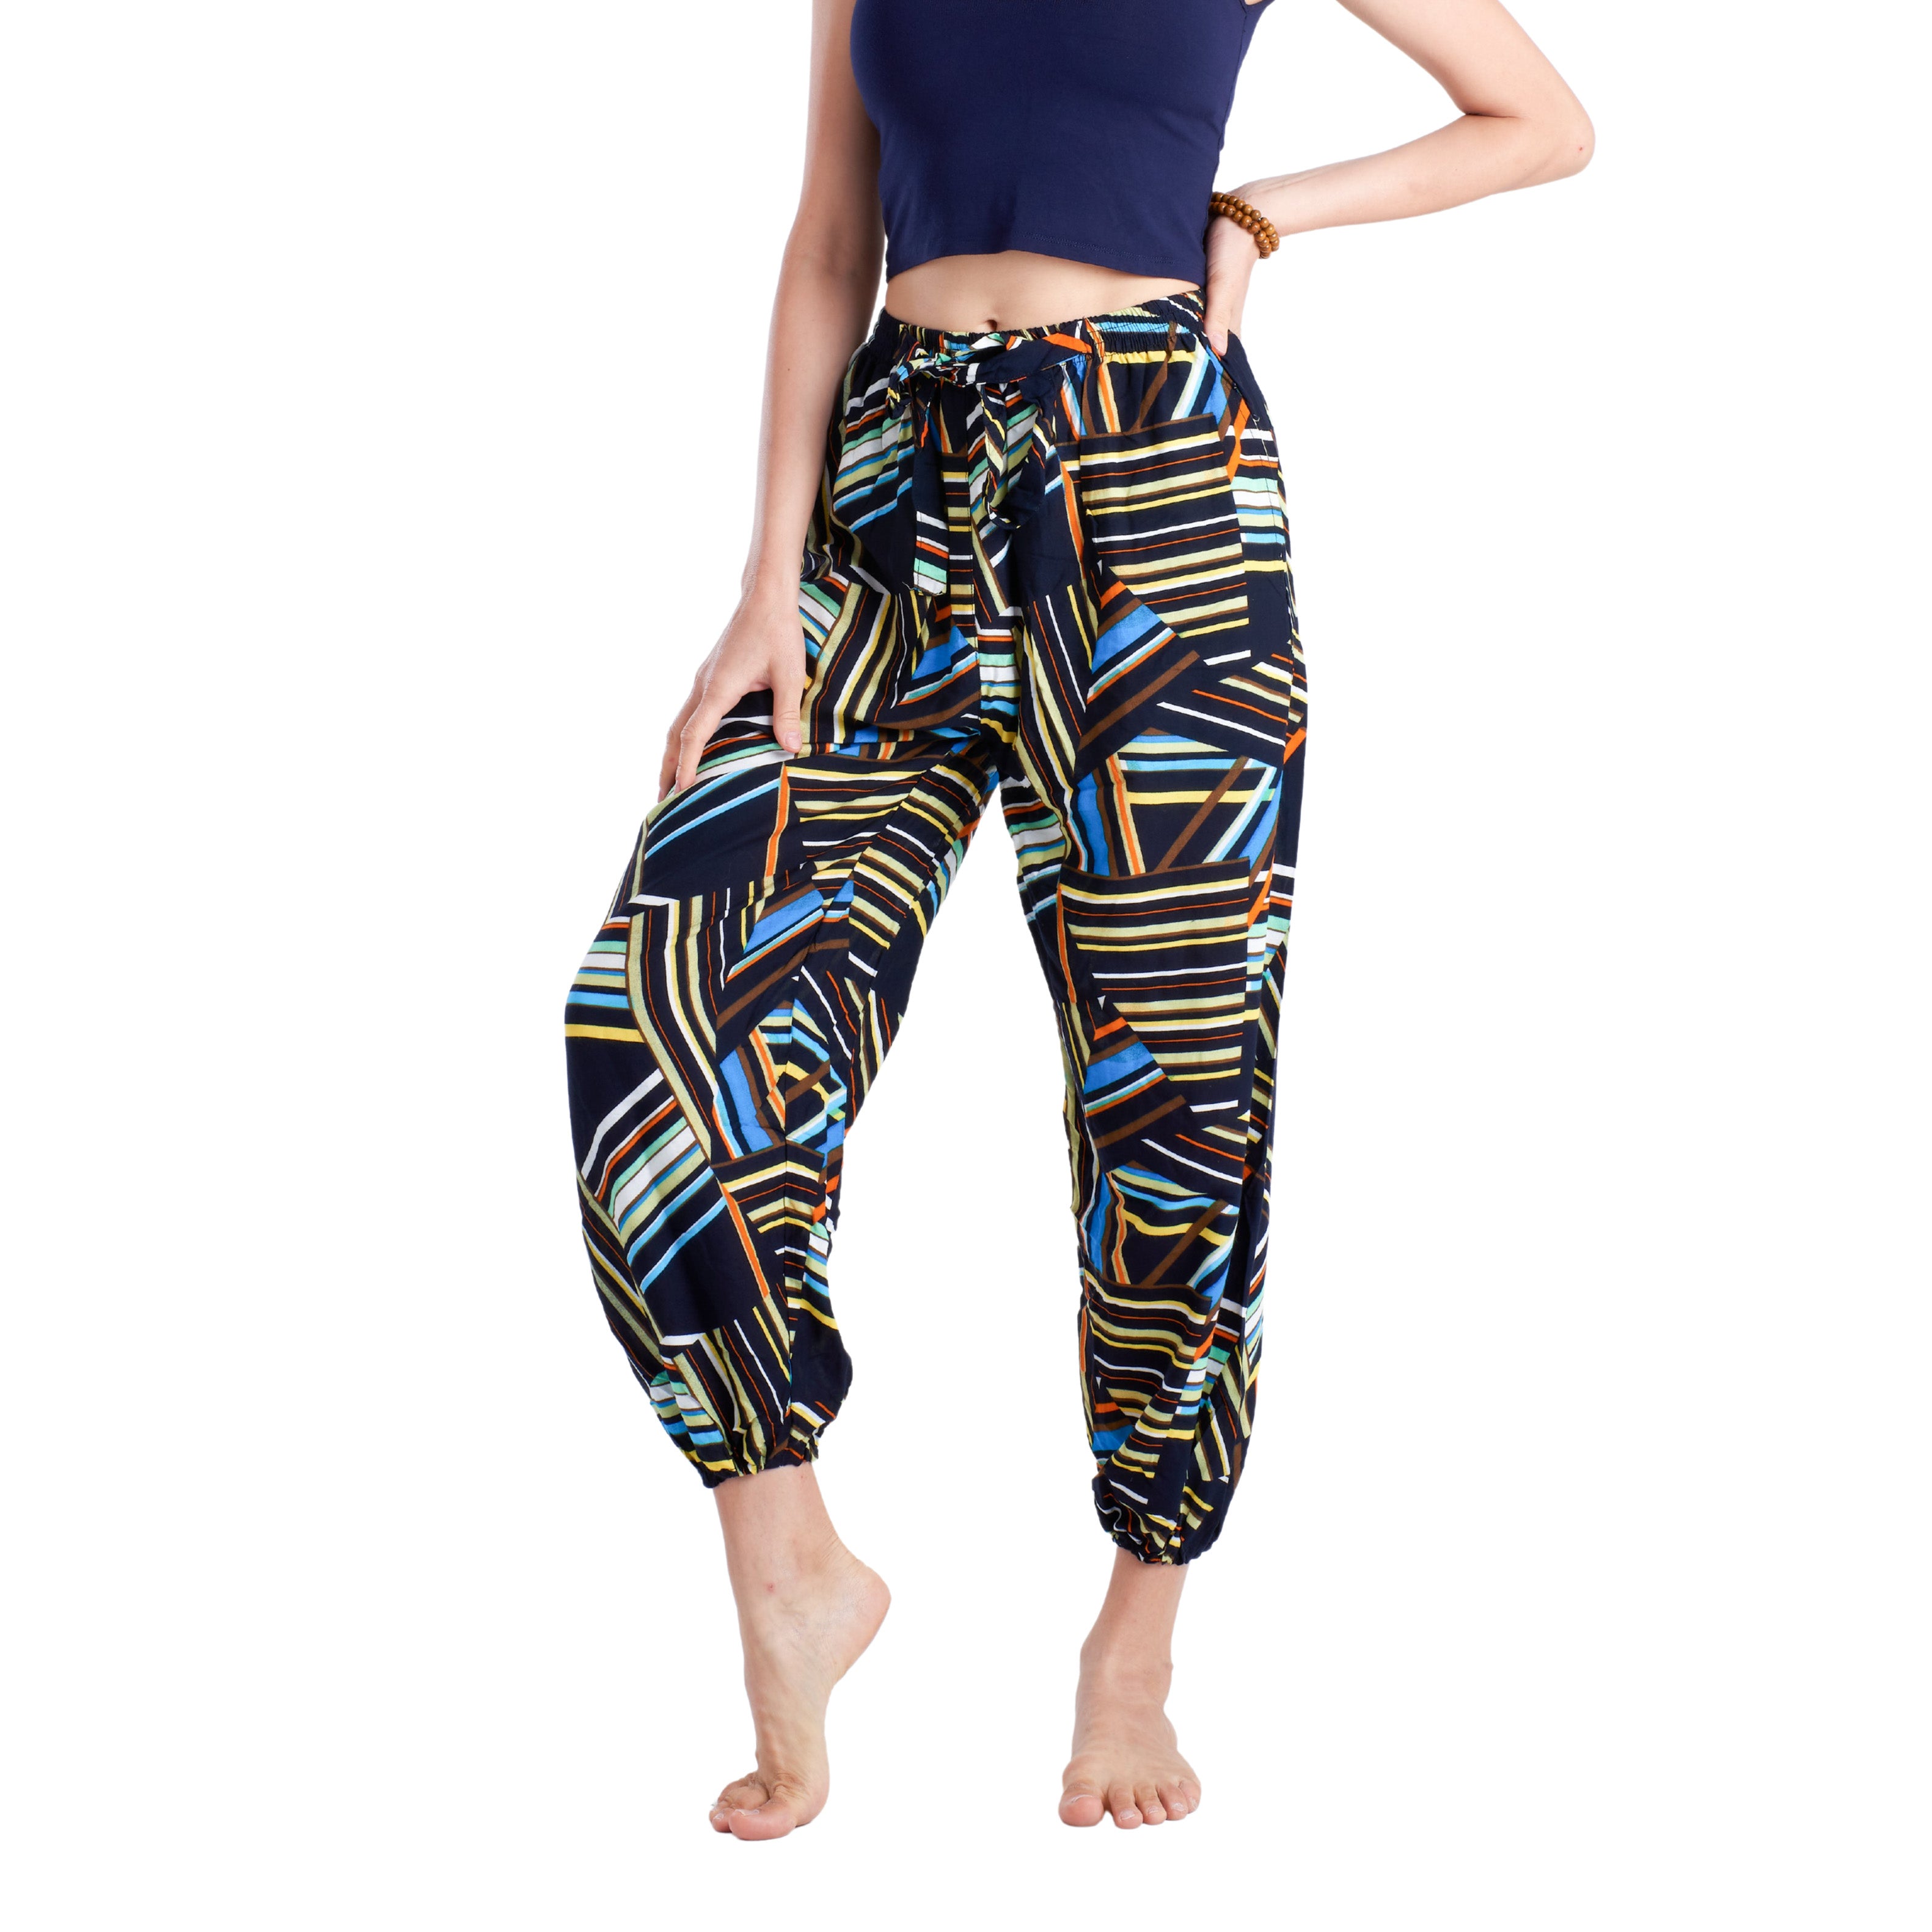 CANZUL PANTS - Drawstring Elepanta Drawstring Pants - Buy Today Elephant Pants Jewelry And Bohemian Clothes Handmade In Thailand Help To Save The Elephants FairTrade And Vegan